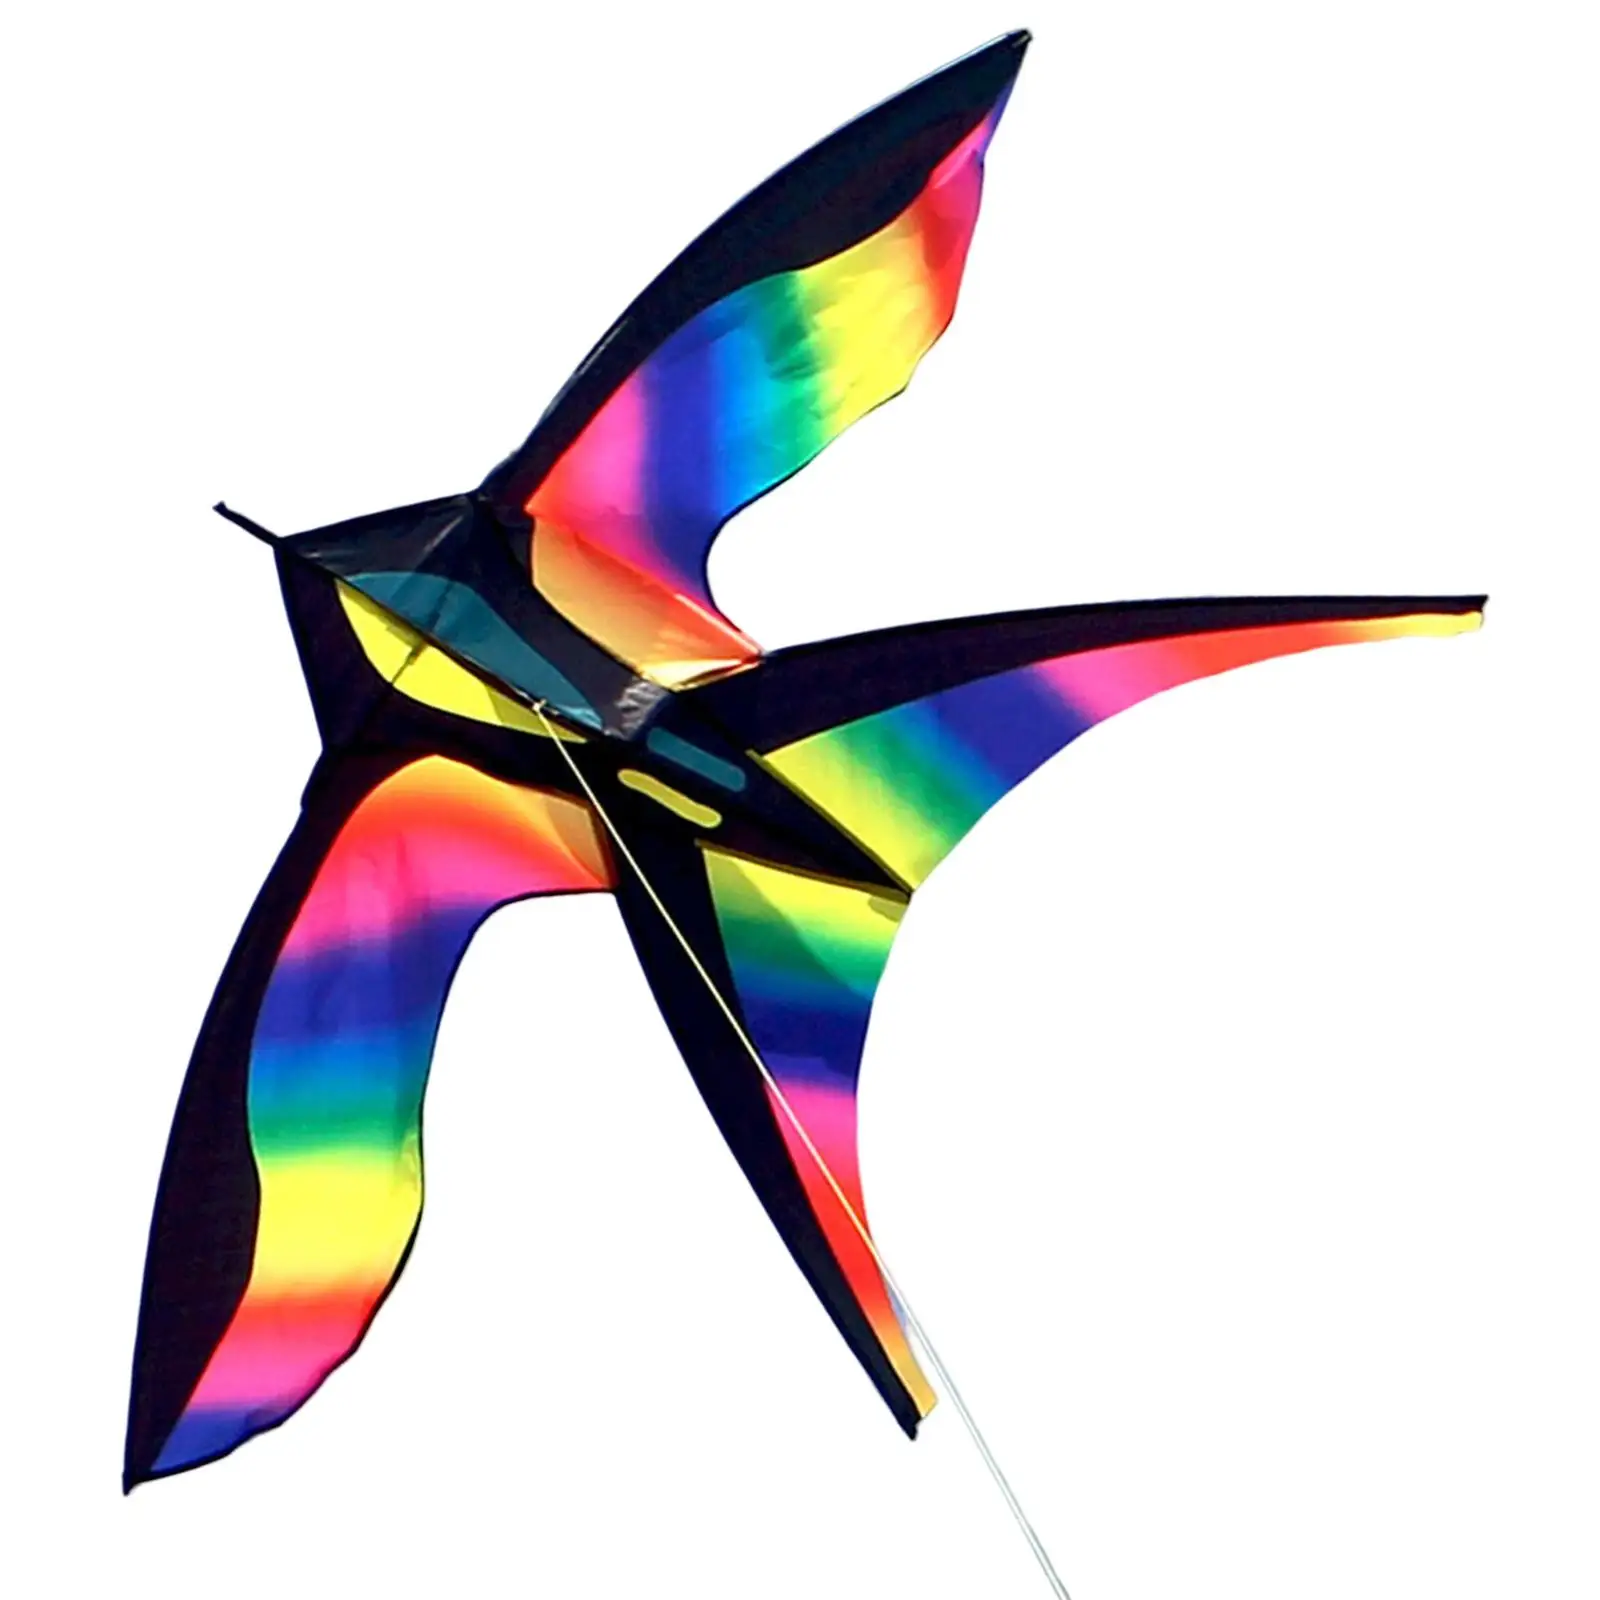 Colorful Bird Kite Swallow Kite Easy to Fly Huge Wingspan Single Line Giant for Garden Outdoor Kids Adults Activities Games